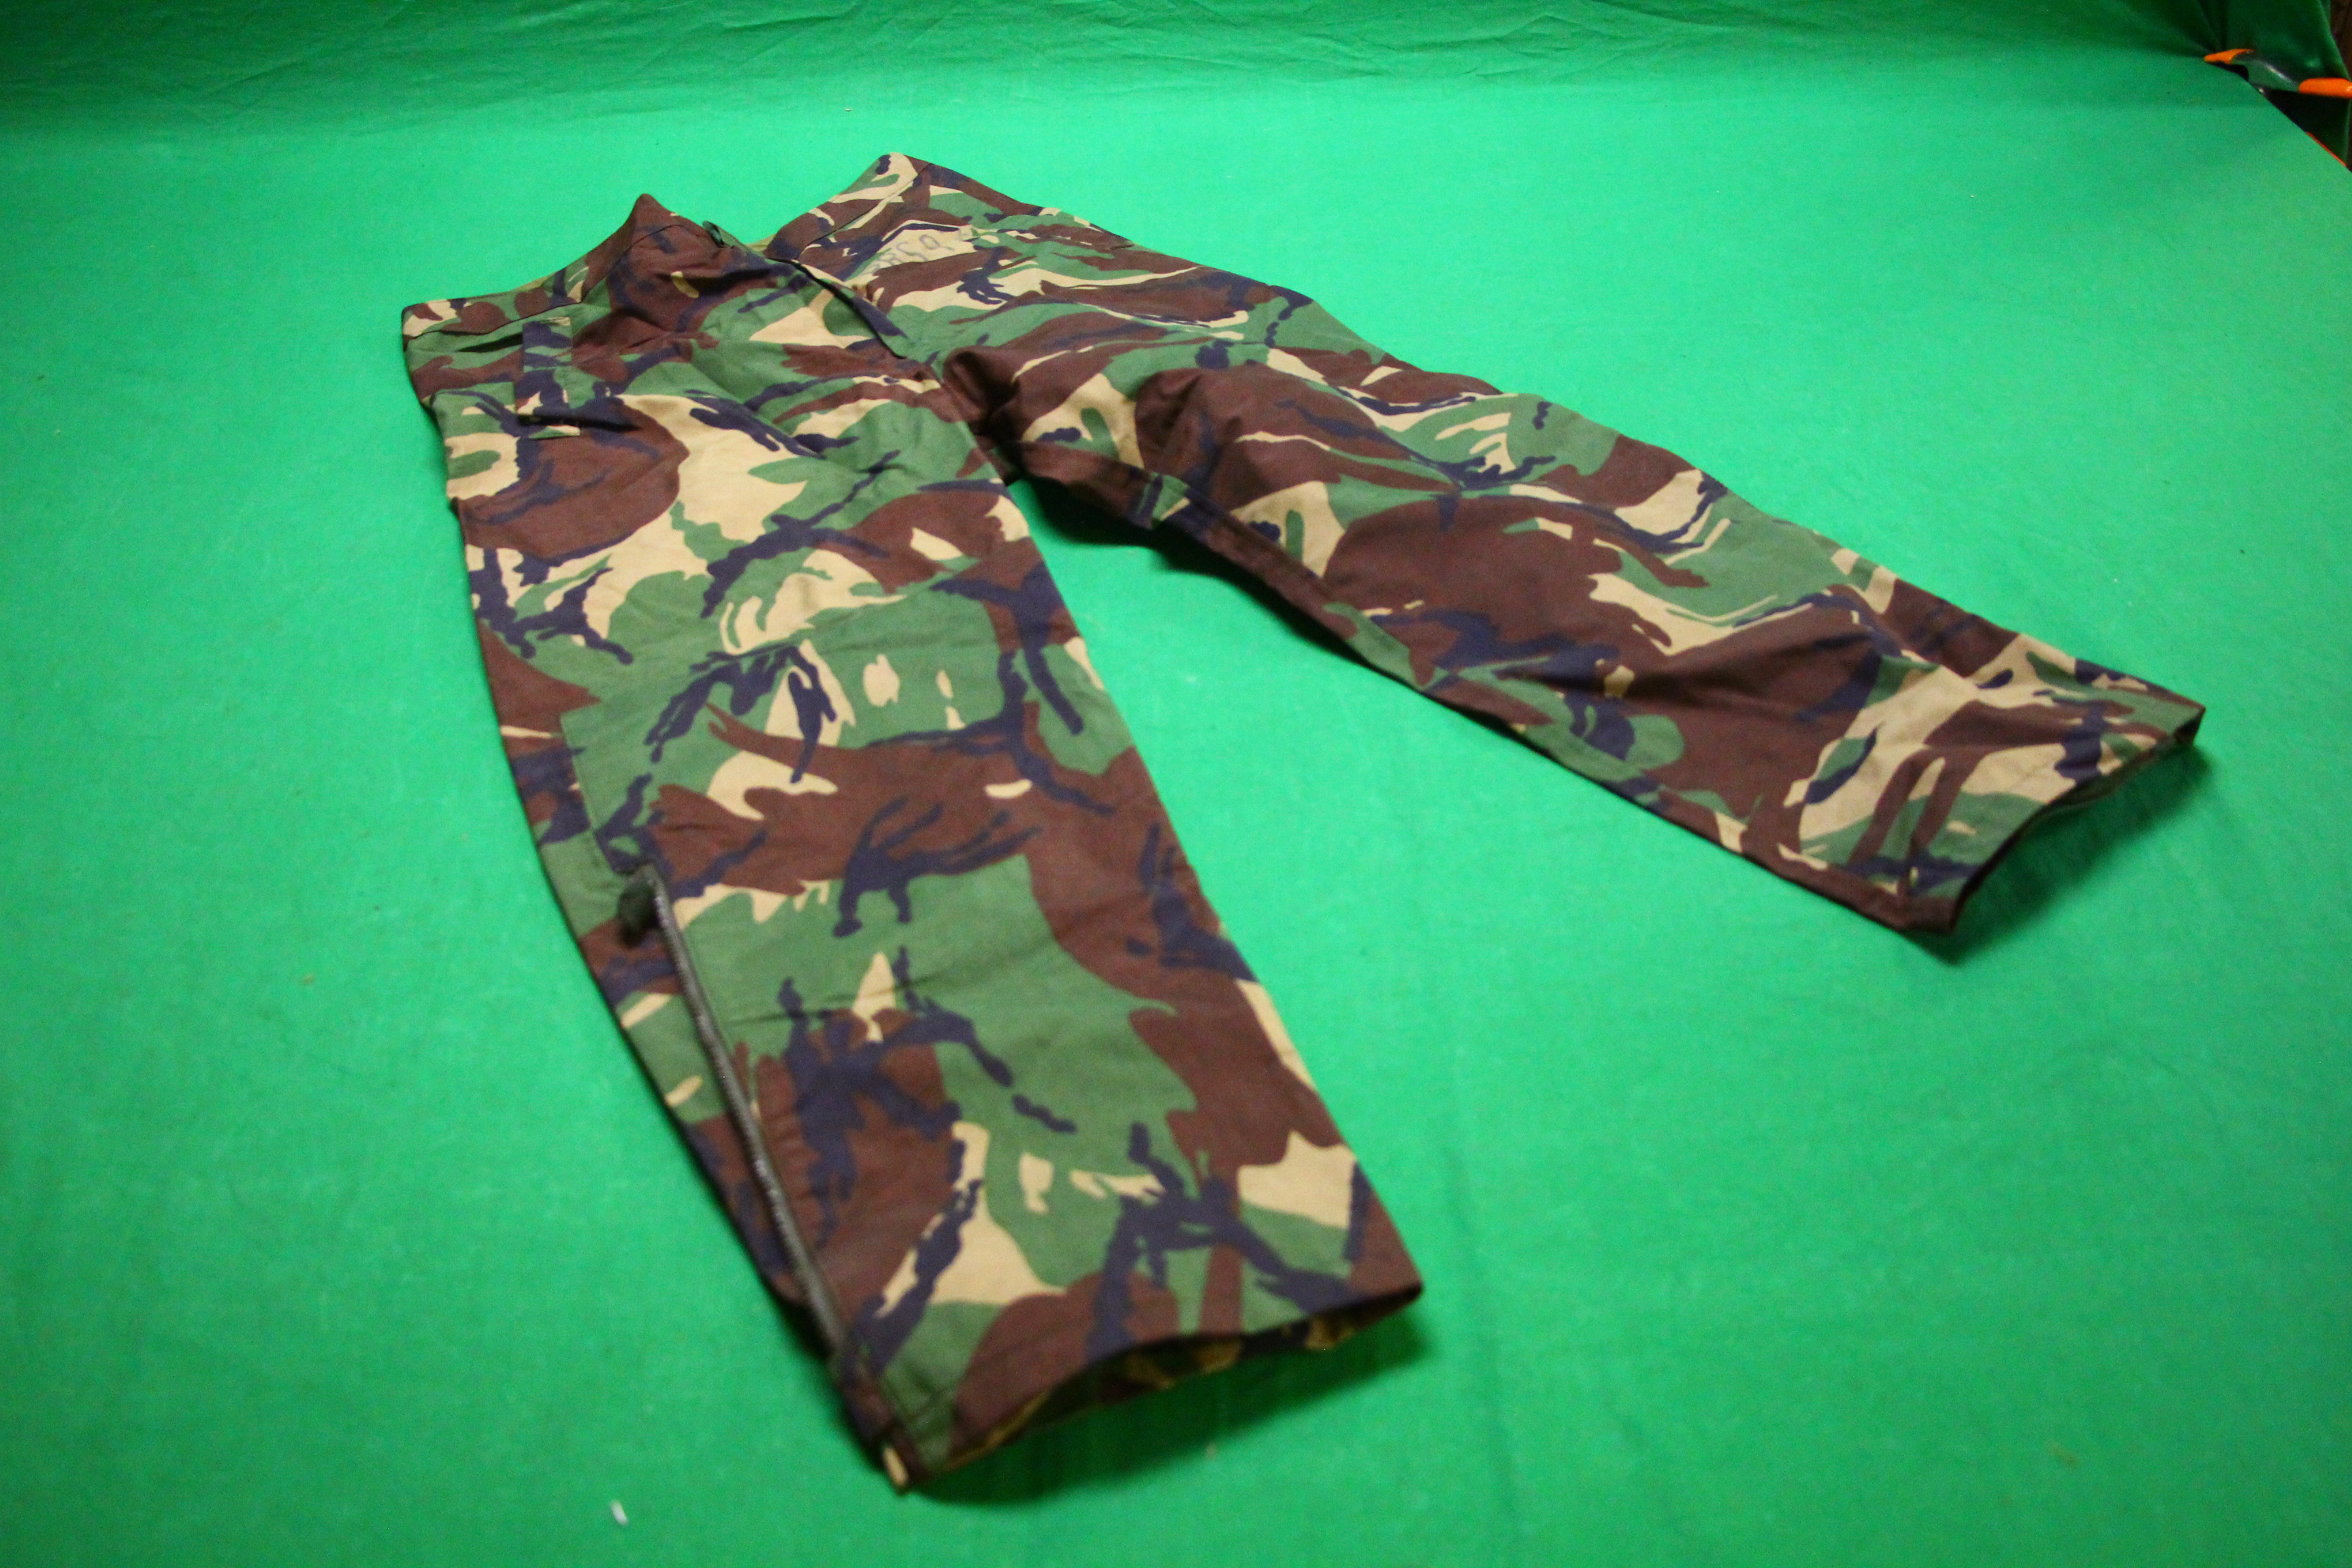 AS NEW CAMOFLAGE CLOTHING TO INCLUDE JACKET, TROUSERS, - Image 7 of 8